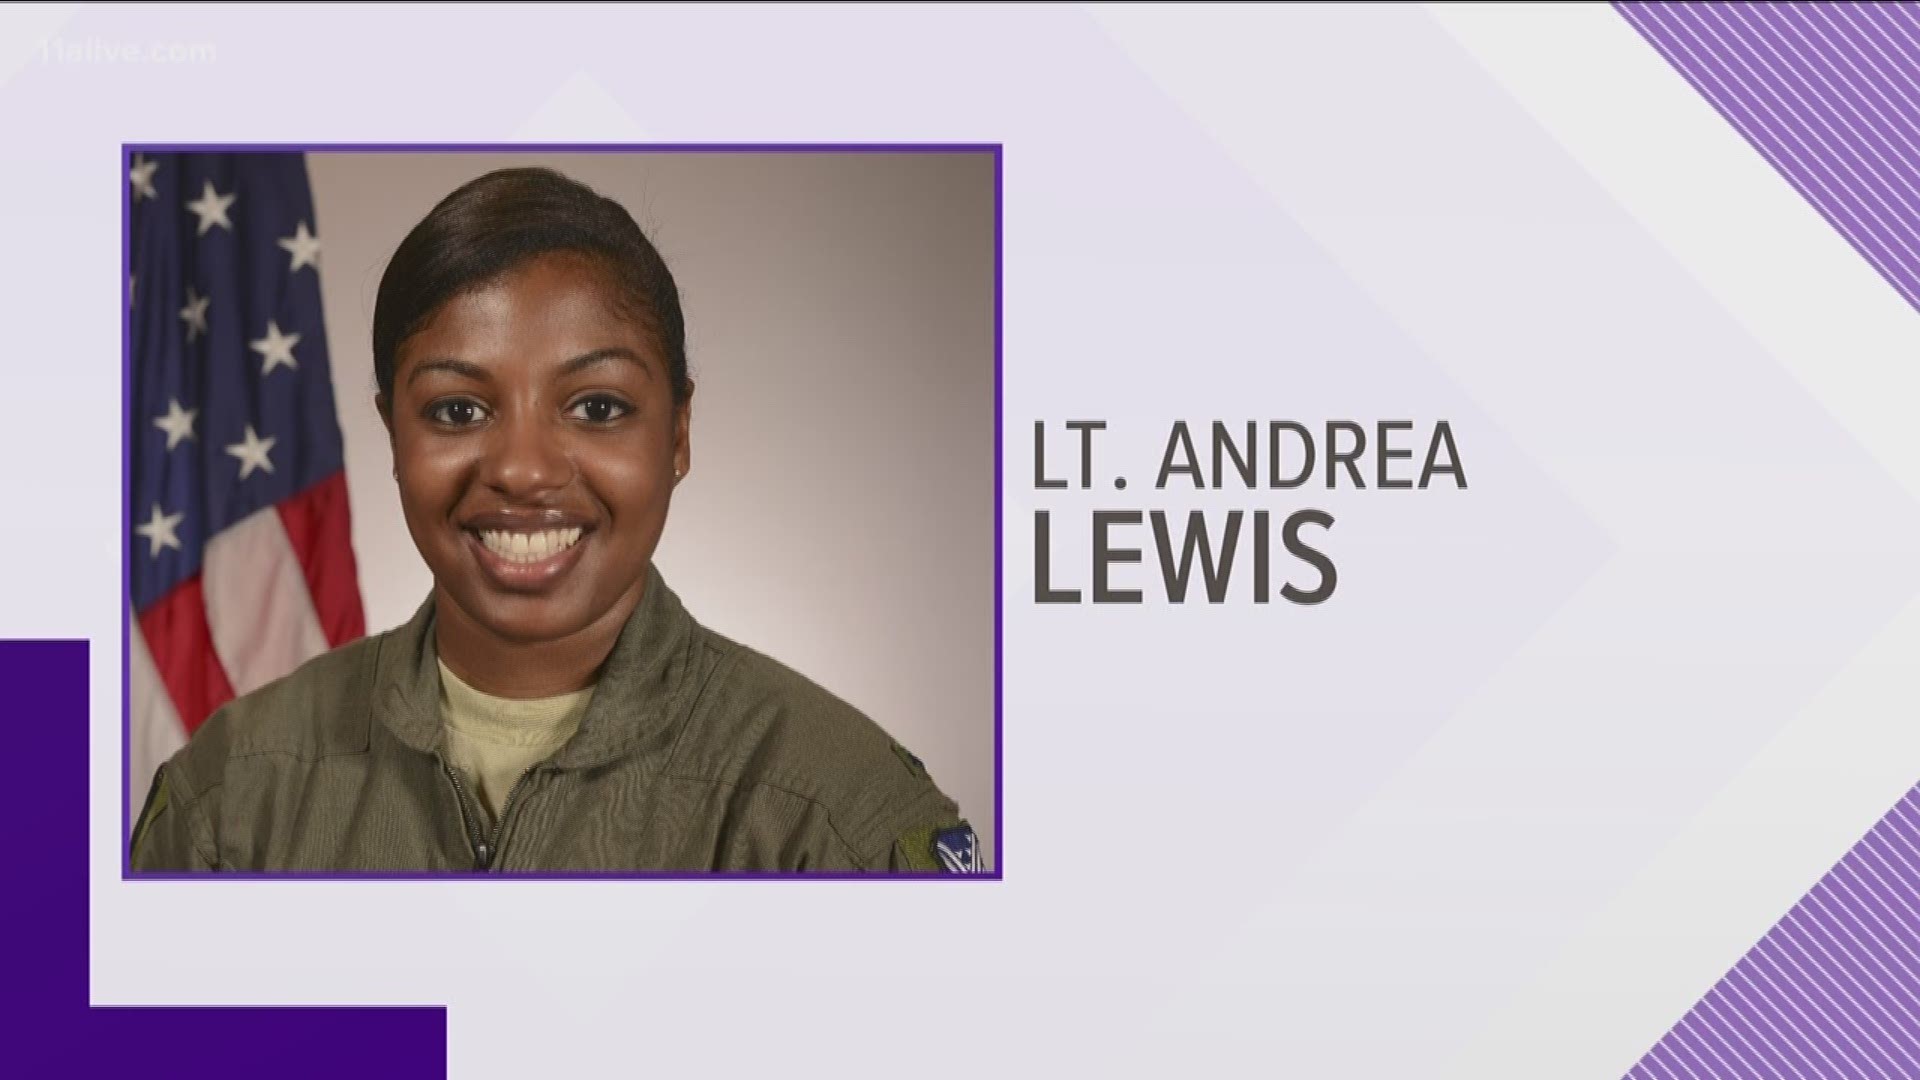 Lt. Andrea Lewis said serving others is in her DNA.